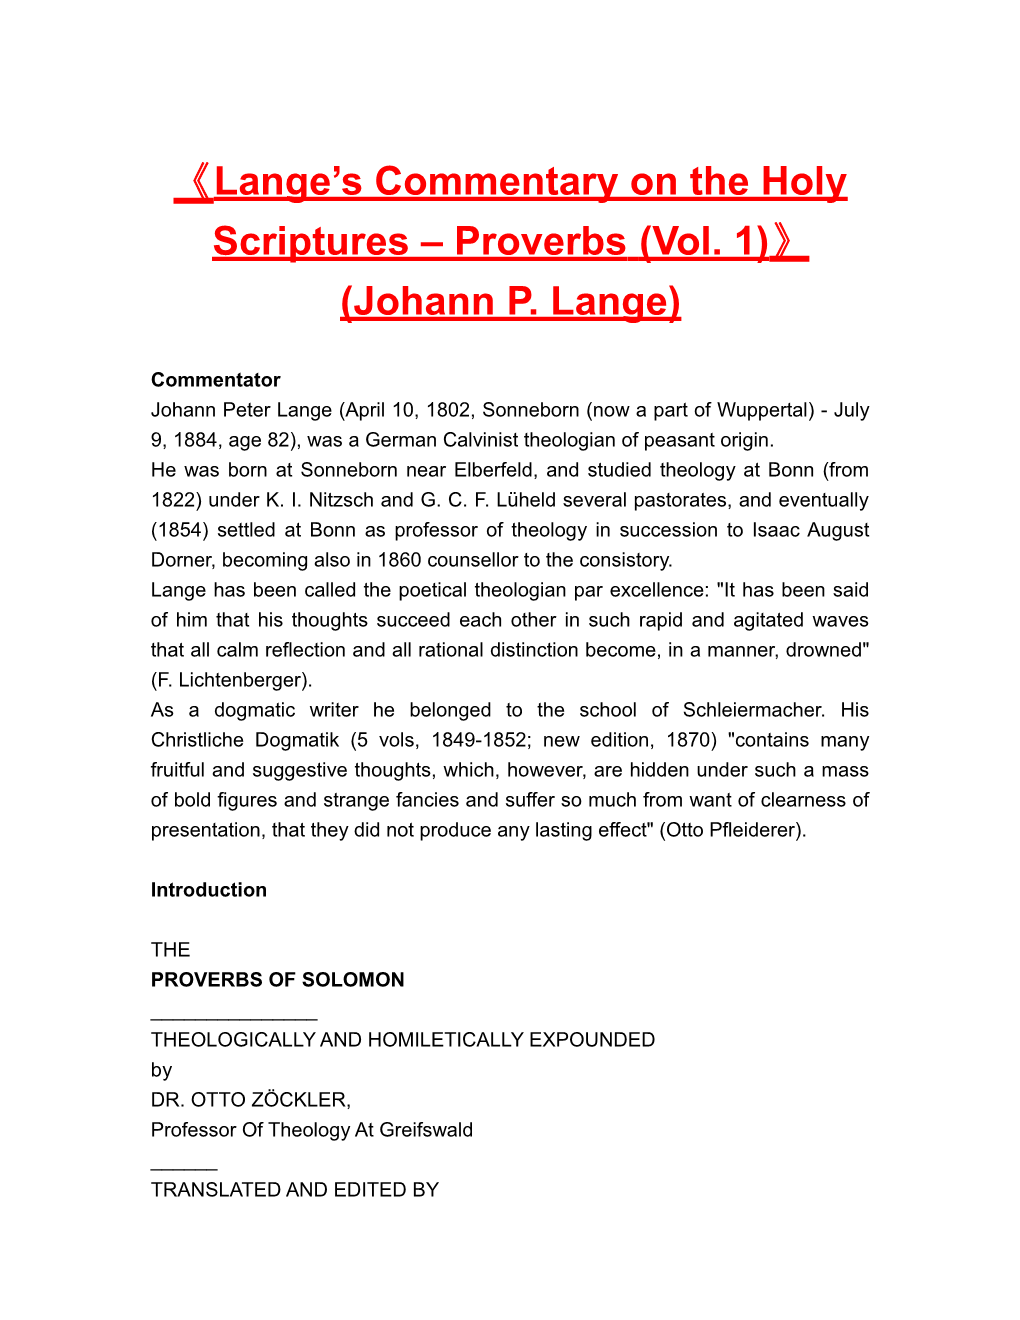 Lange S Commentary on the Holyscriptures Proverbs(Vol. 1) (Johann P. Lange)